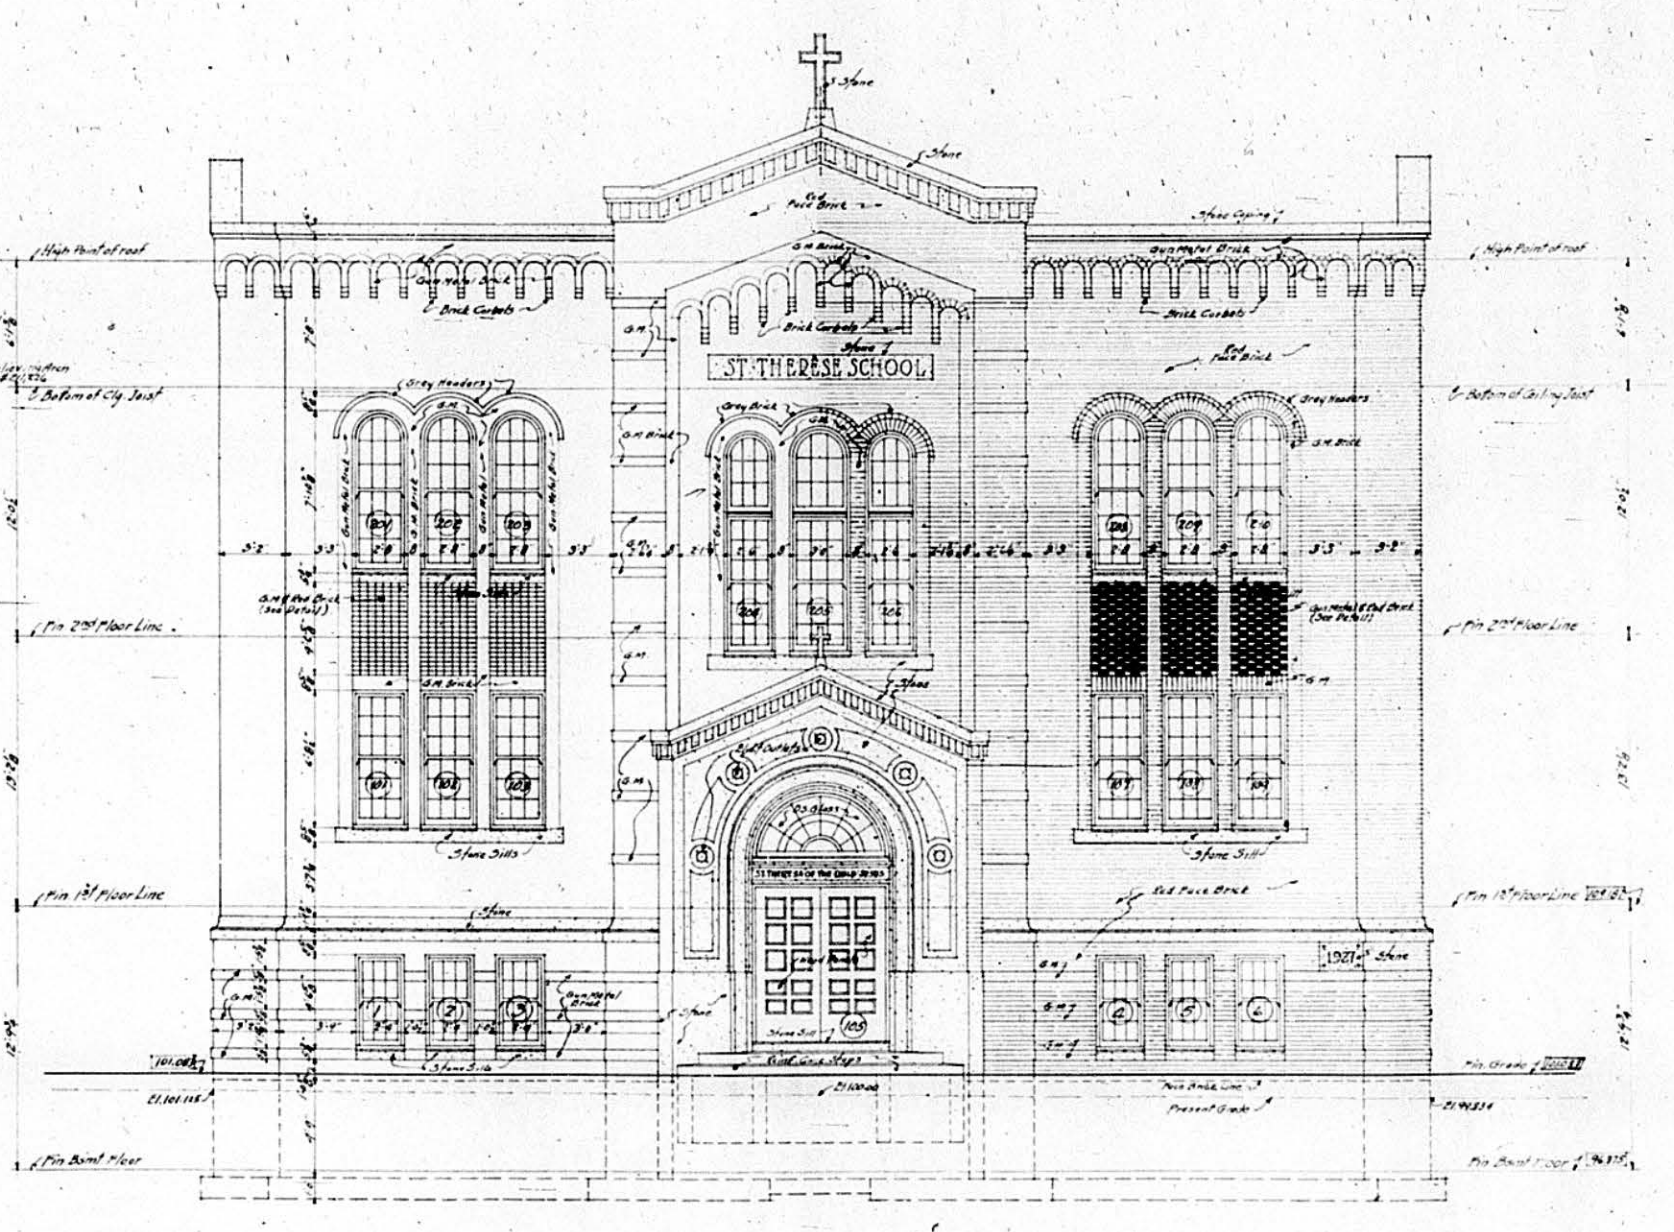 This is an original 1927 architectural drawing made by the firm Lahr & Strangel, showing St. Therese School at 1423 Ogden Street in east Omaha.